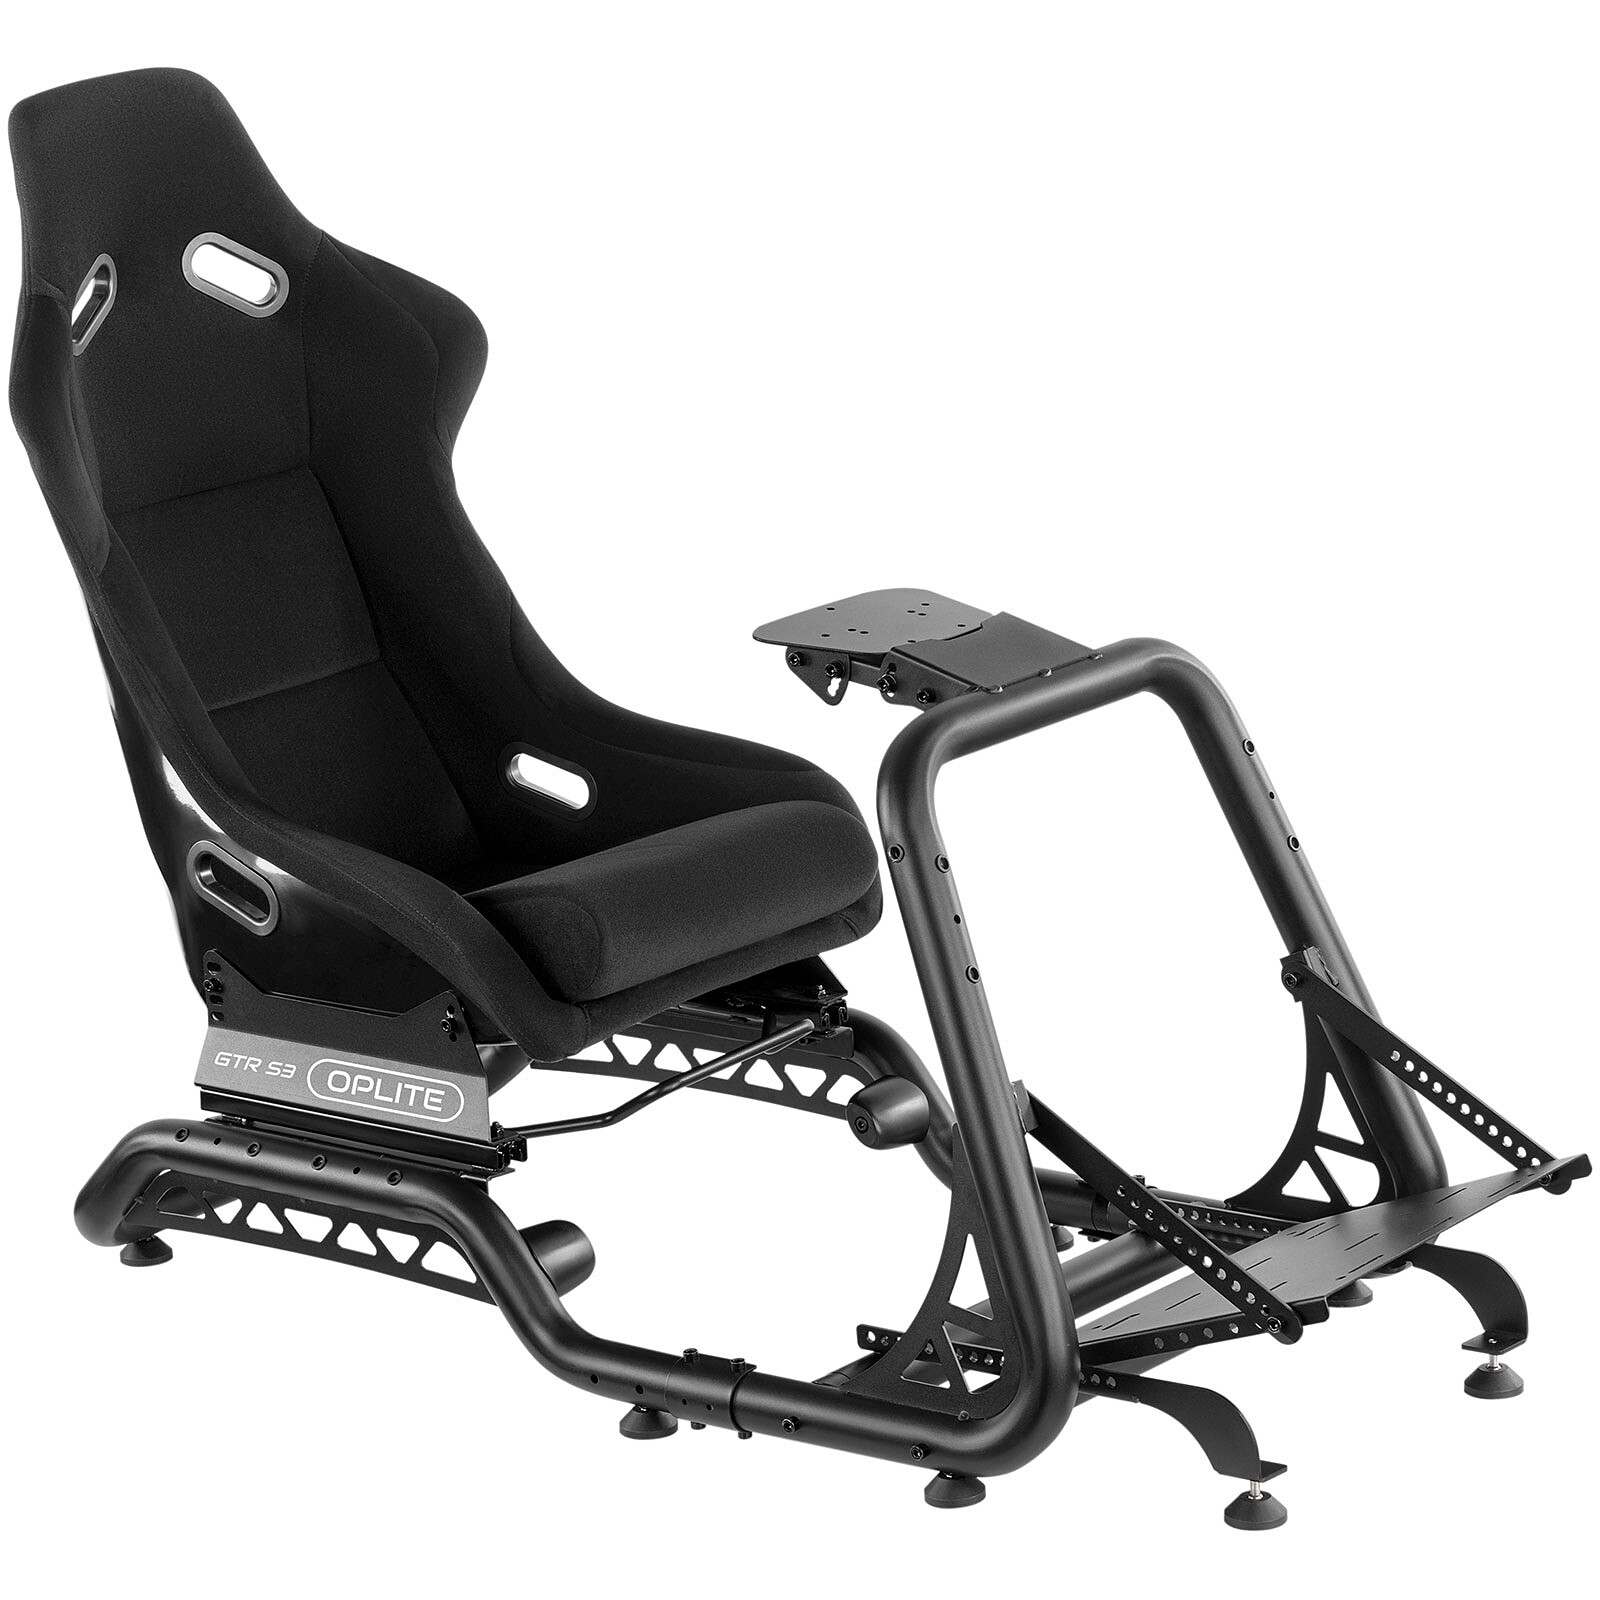 OPLITE GTR Racing Cockpit - Other gaming accessories - LDLC 3-year